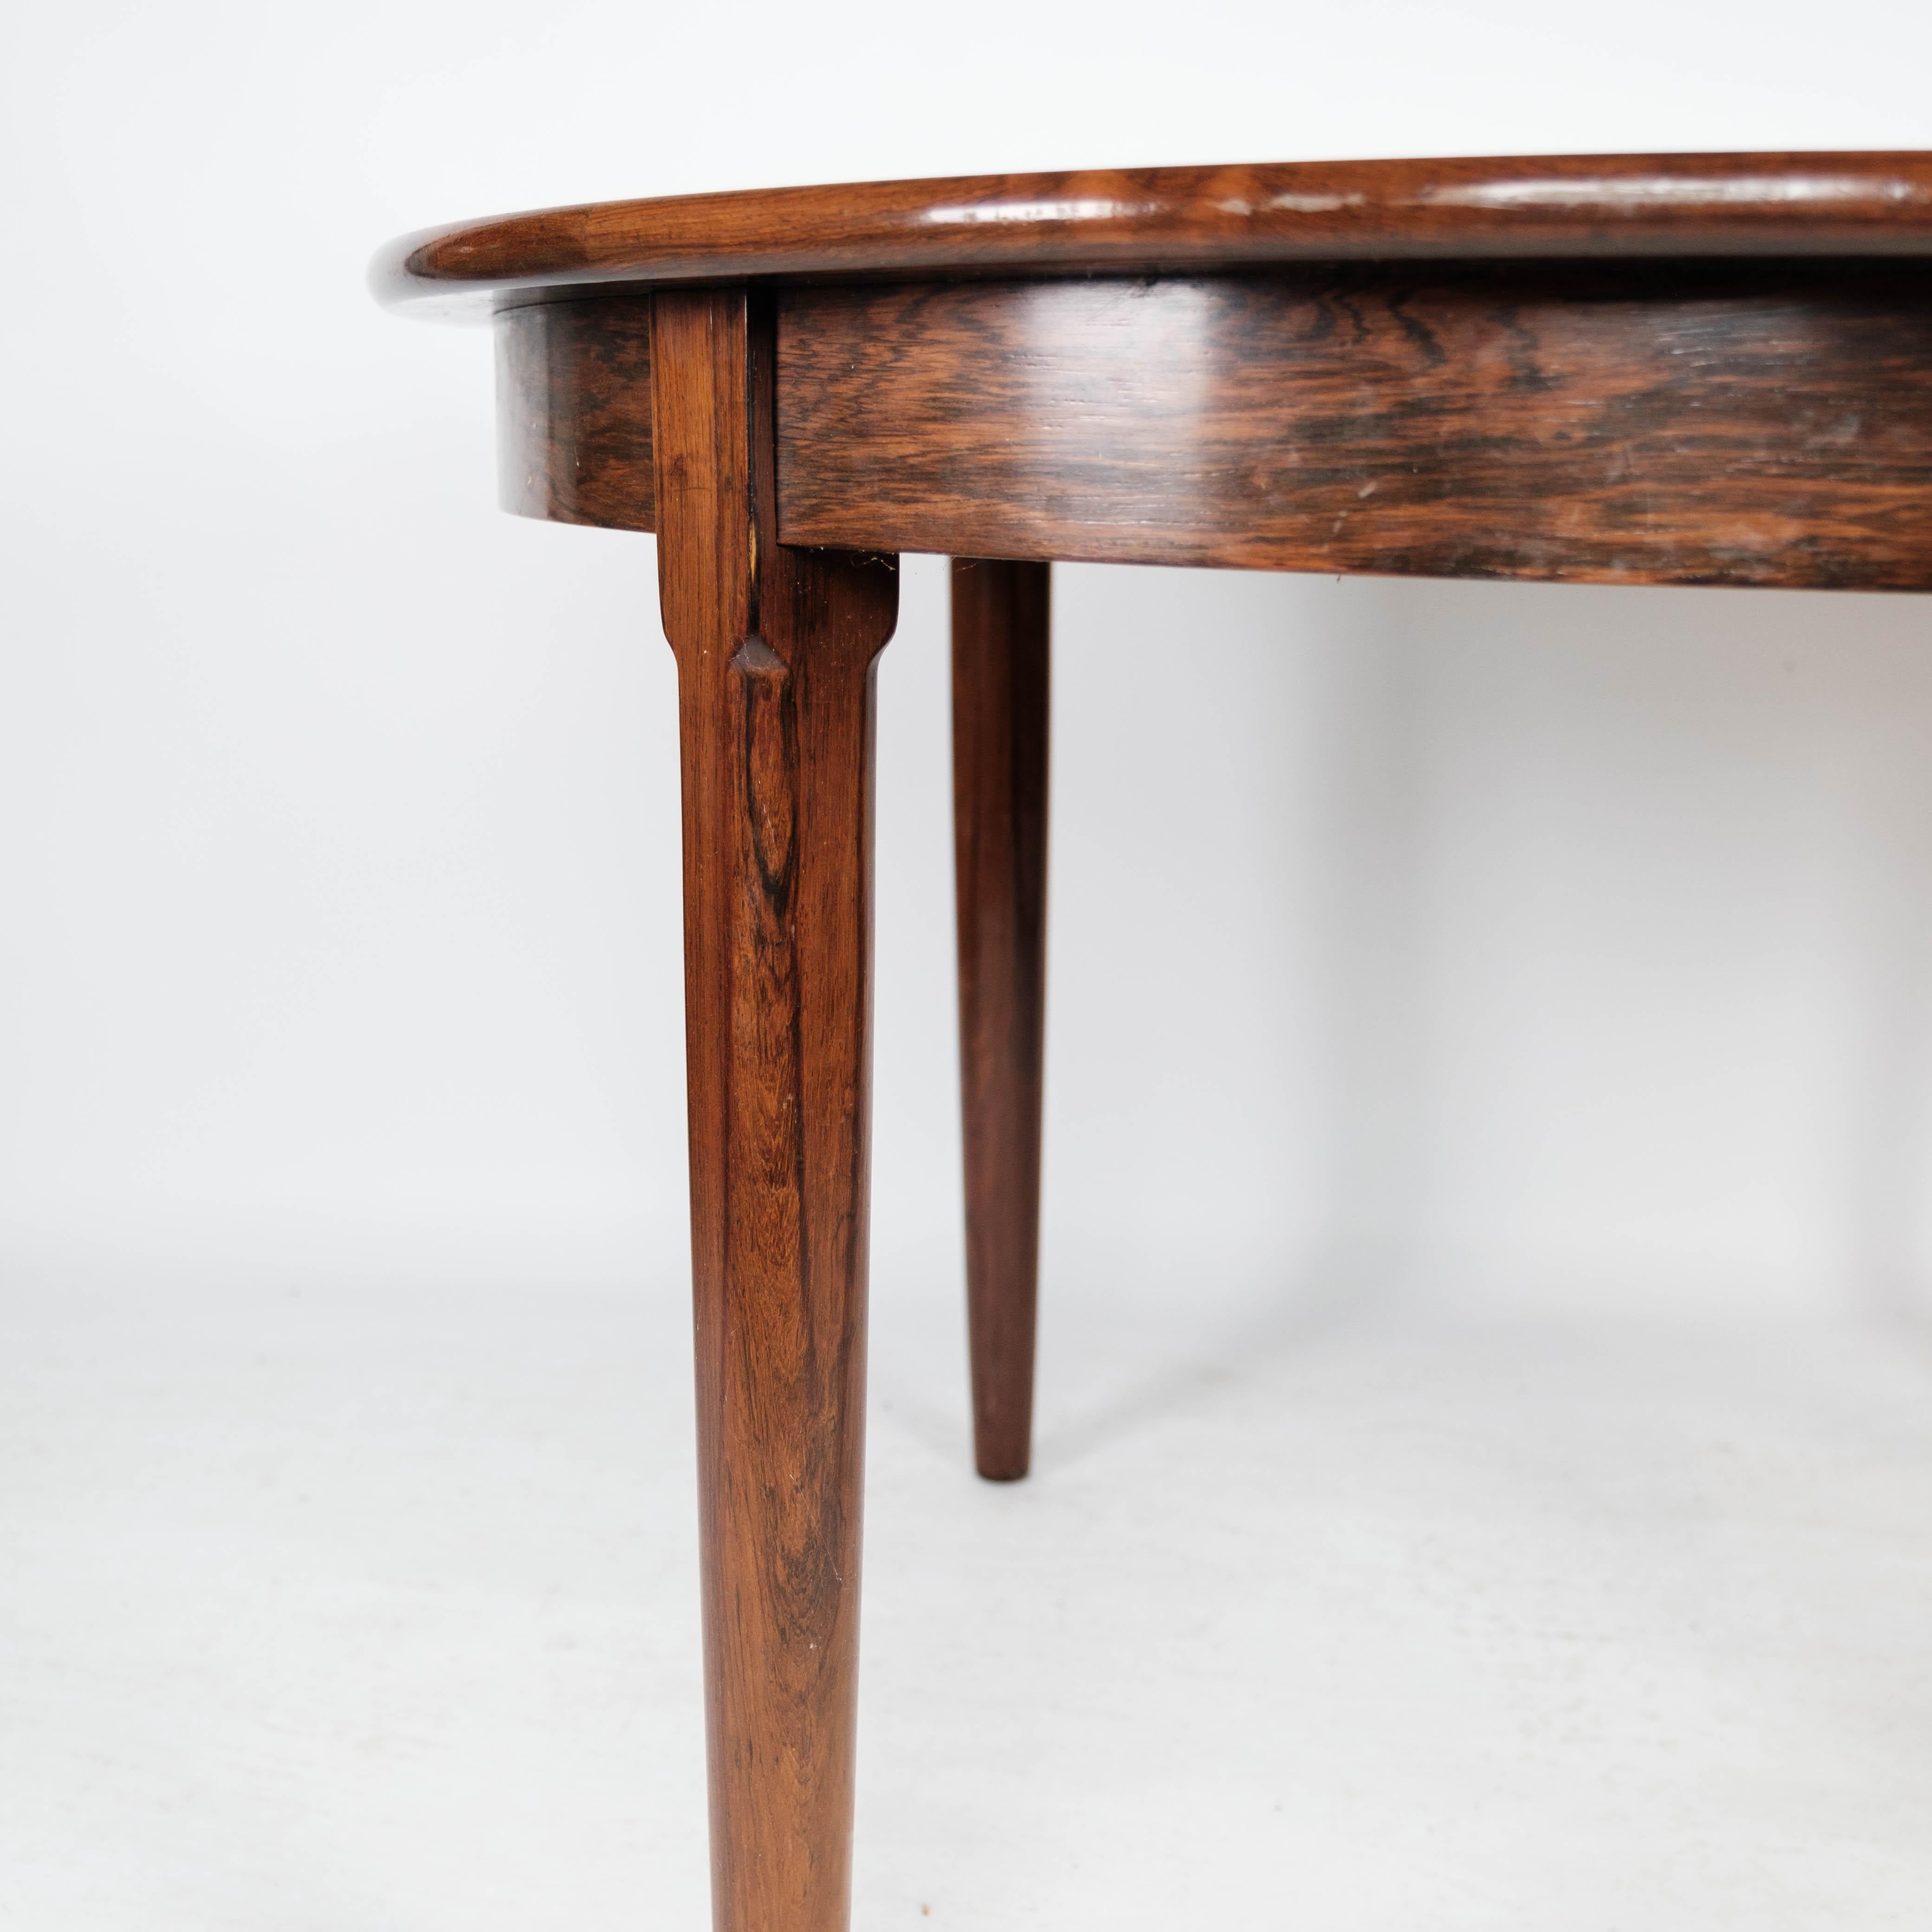 Mid-20th Century Dining Table Made In Rosewood With Extension, Danish Design From 1960s For Sale